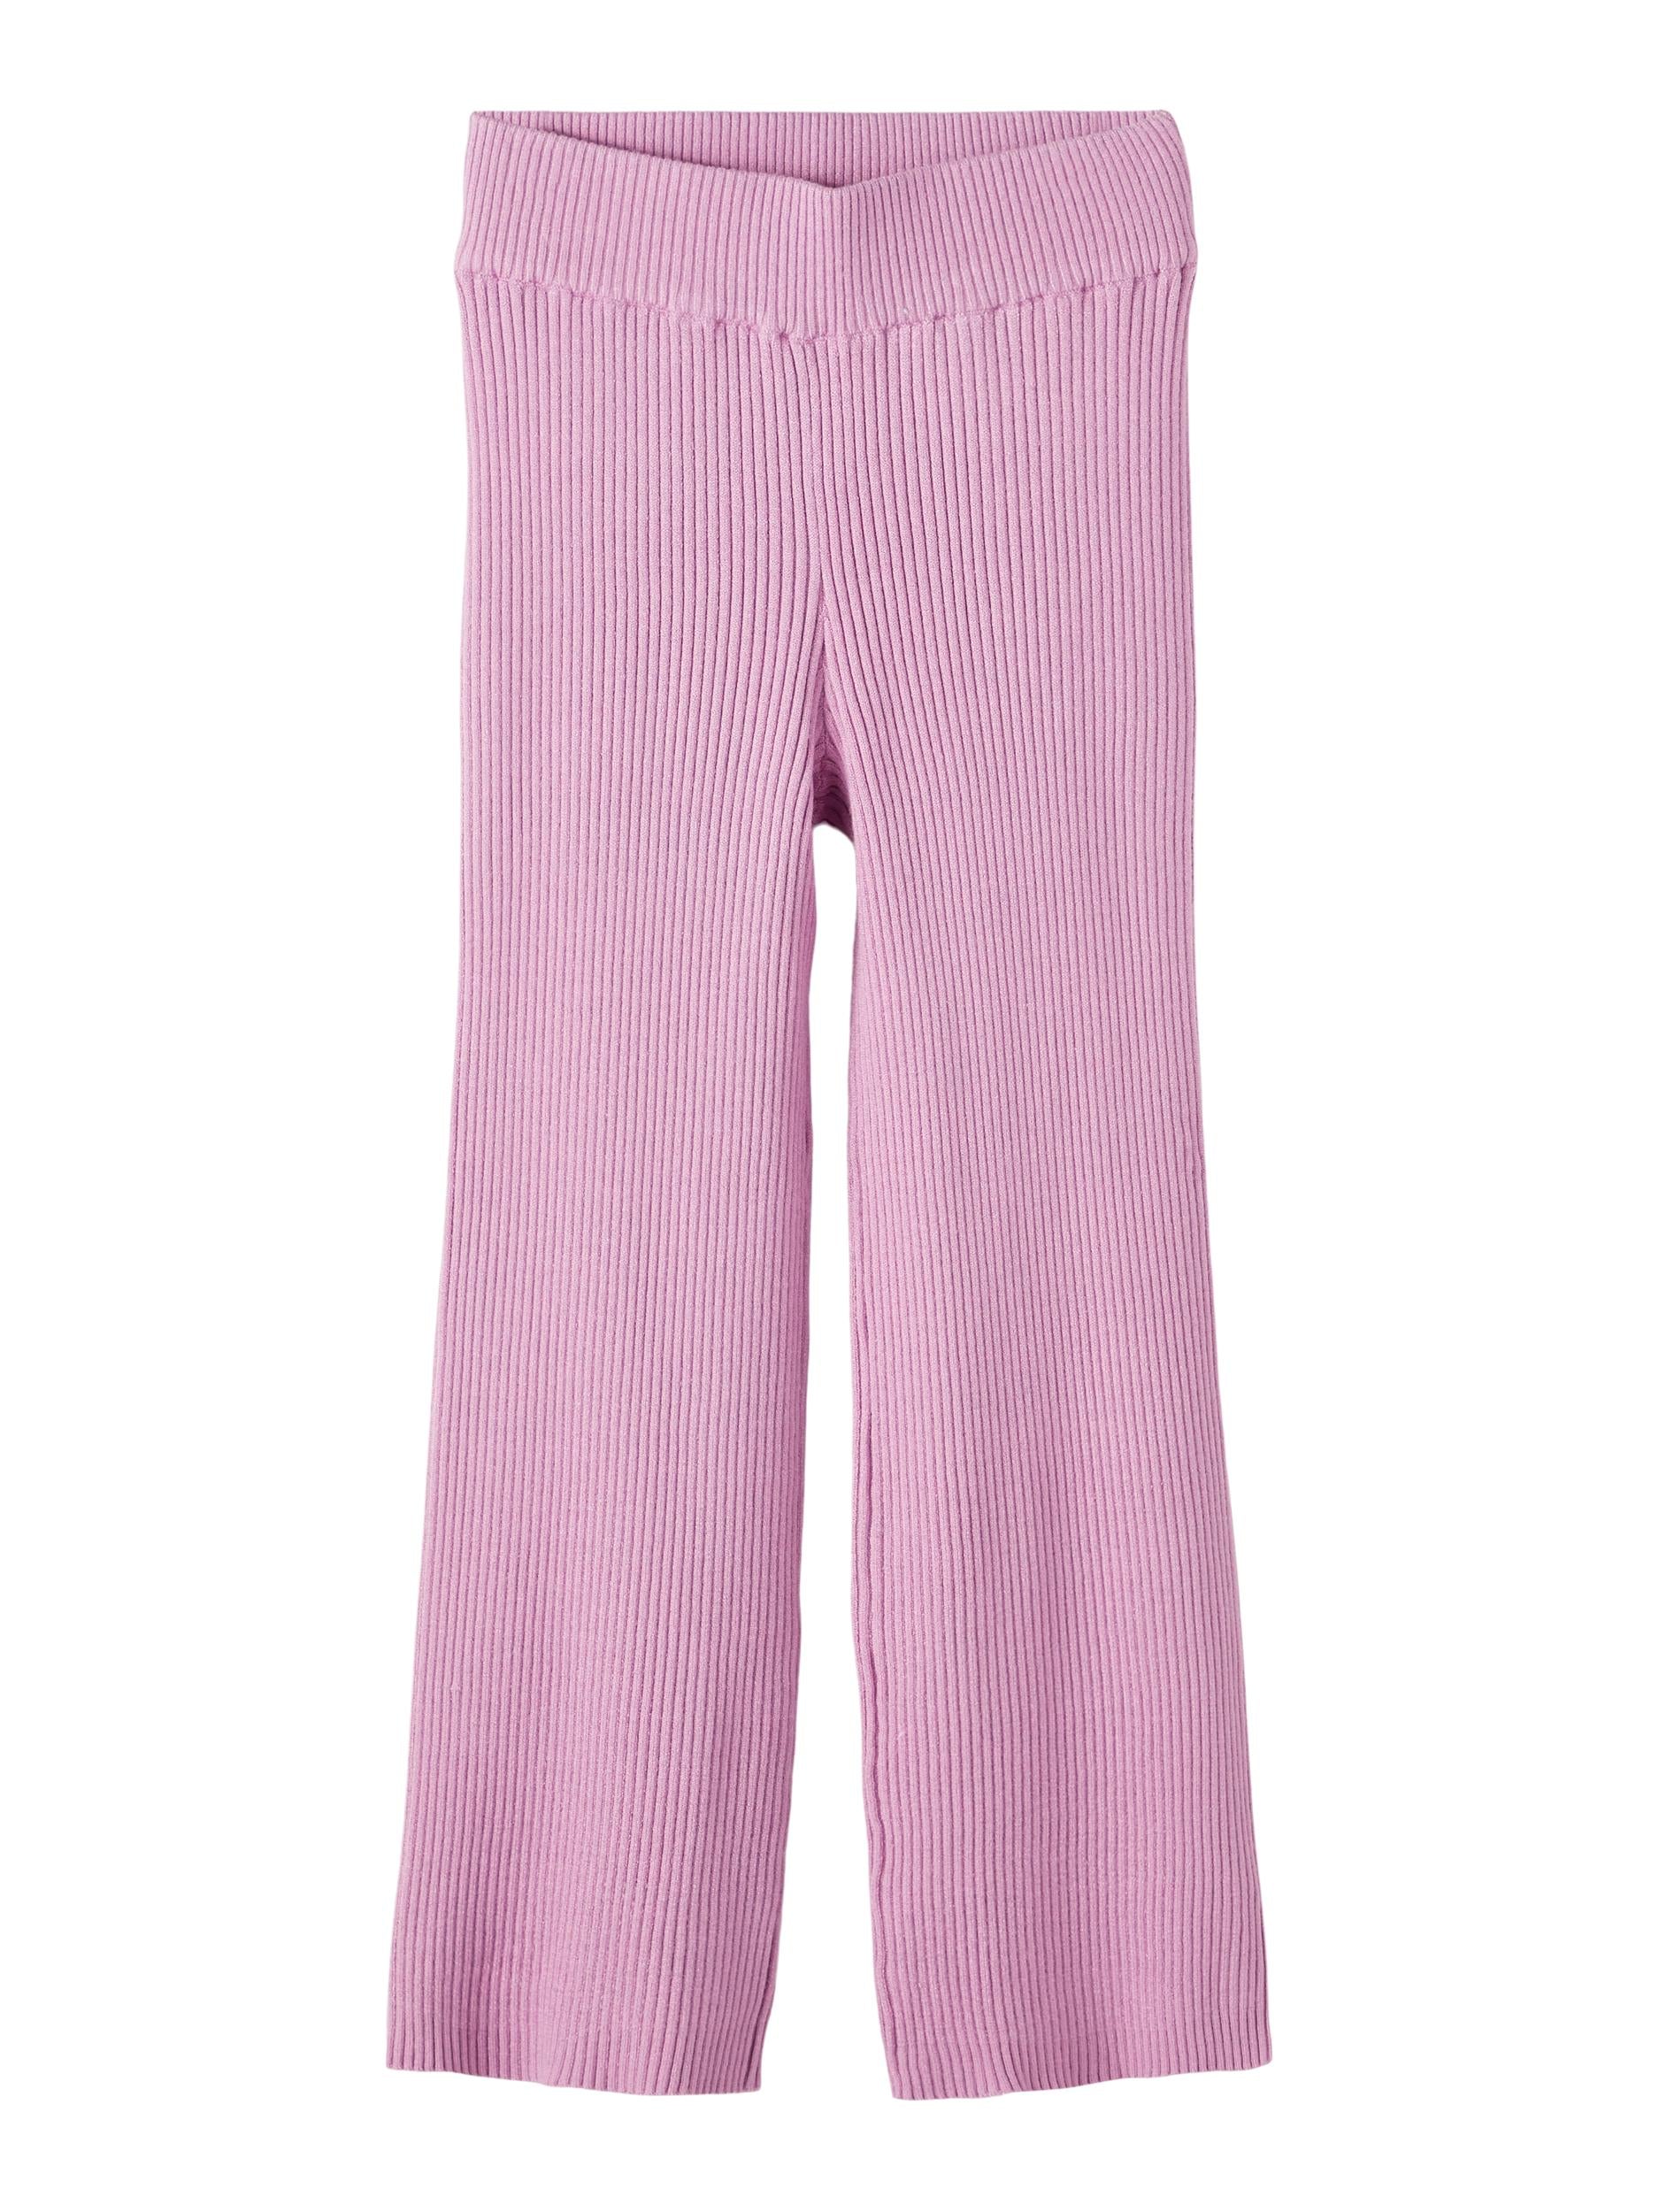 Nikosta Knit Wide Pant - Front View